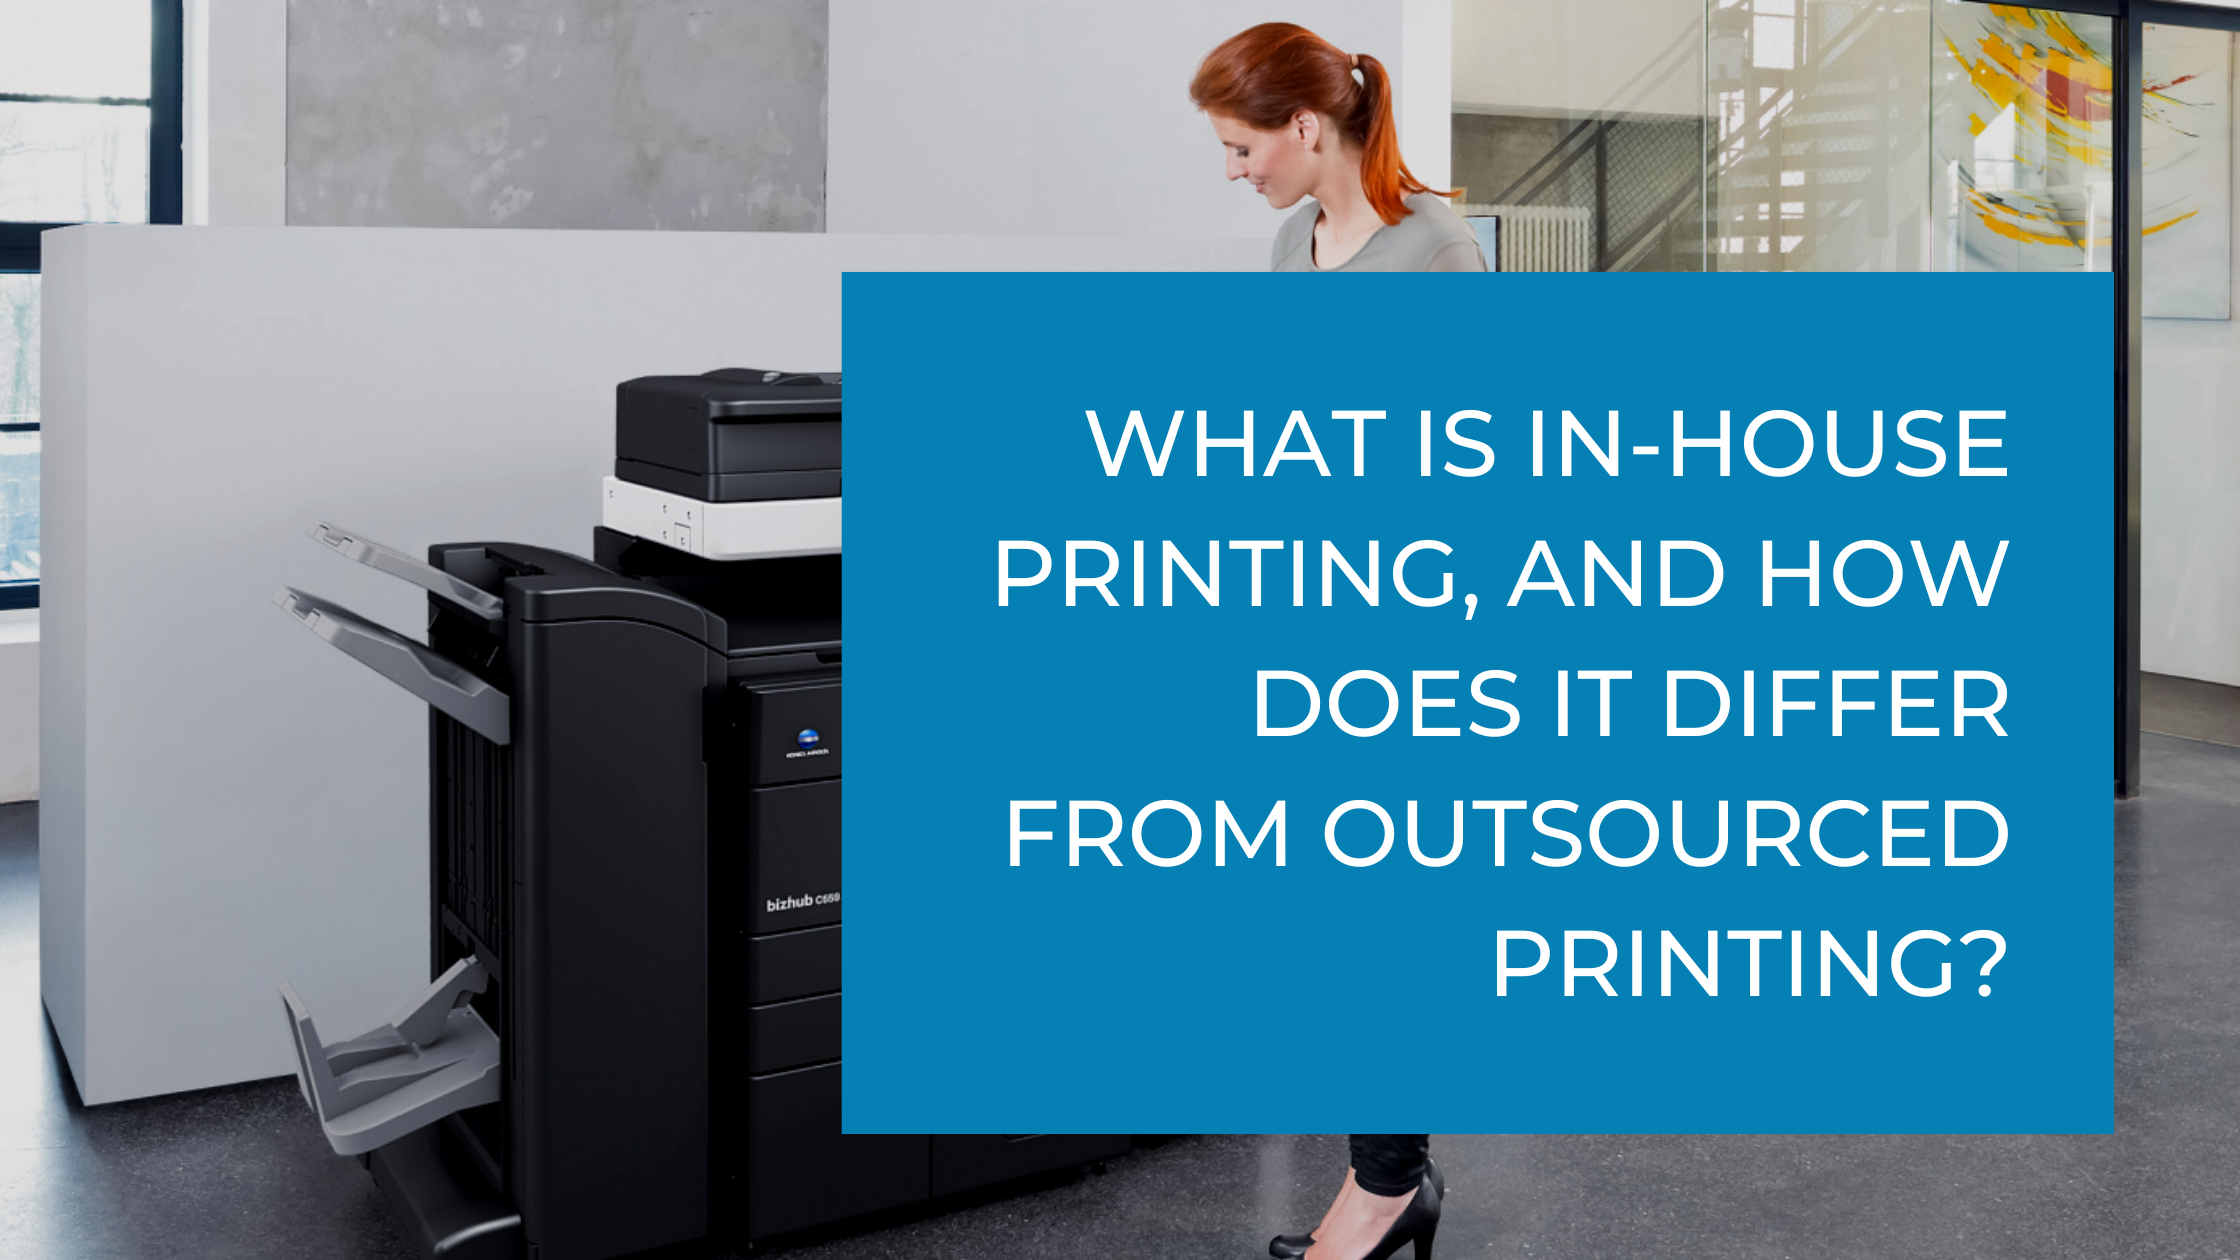 What Is In-House Printing, And How Does It Differ From Outsourced Printing?